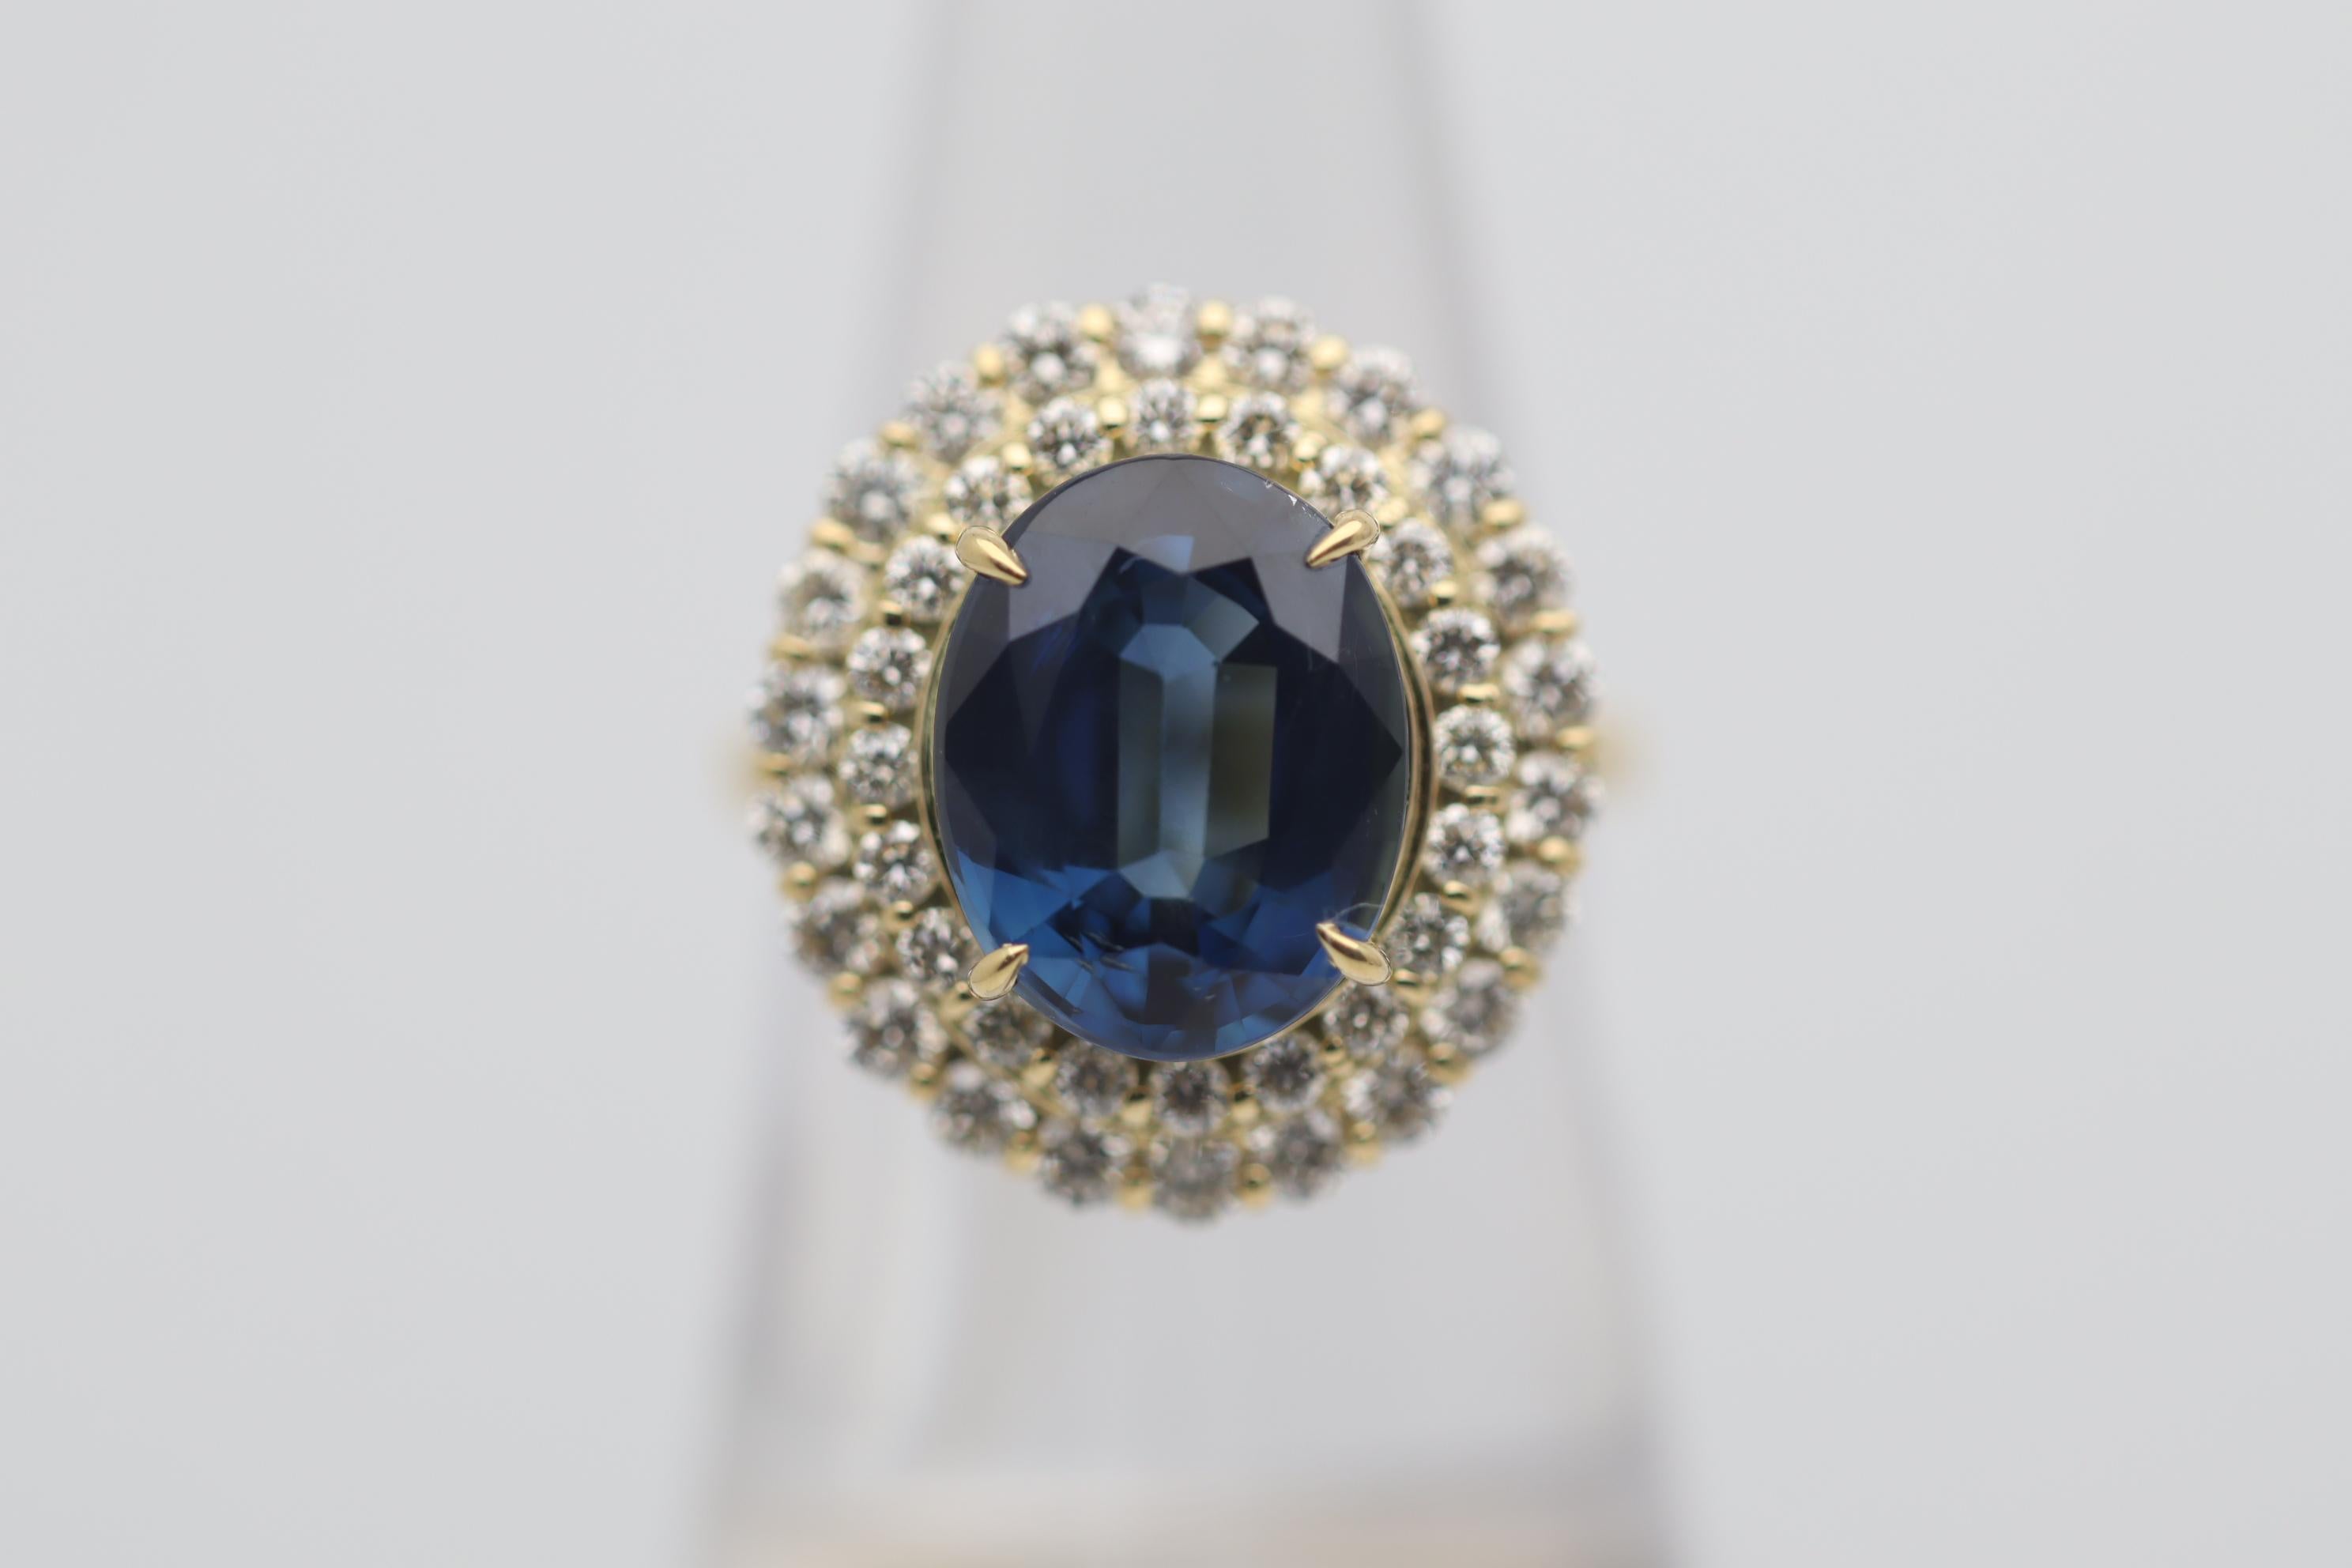 A sleek and sexy ring featuring a fine blue sapphire weighing an impressive 5.96 carats. It has a soft intense blue color which has excellent brightness and light returns as well as being eye clean with no visible inclusions. It is complemented by